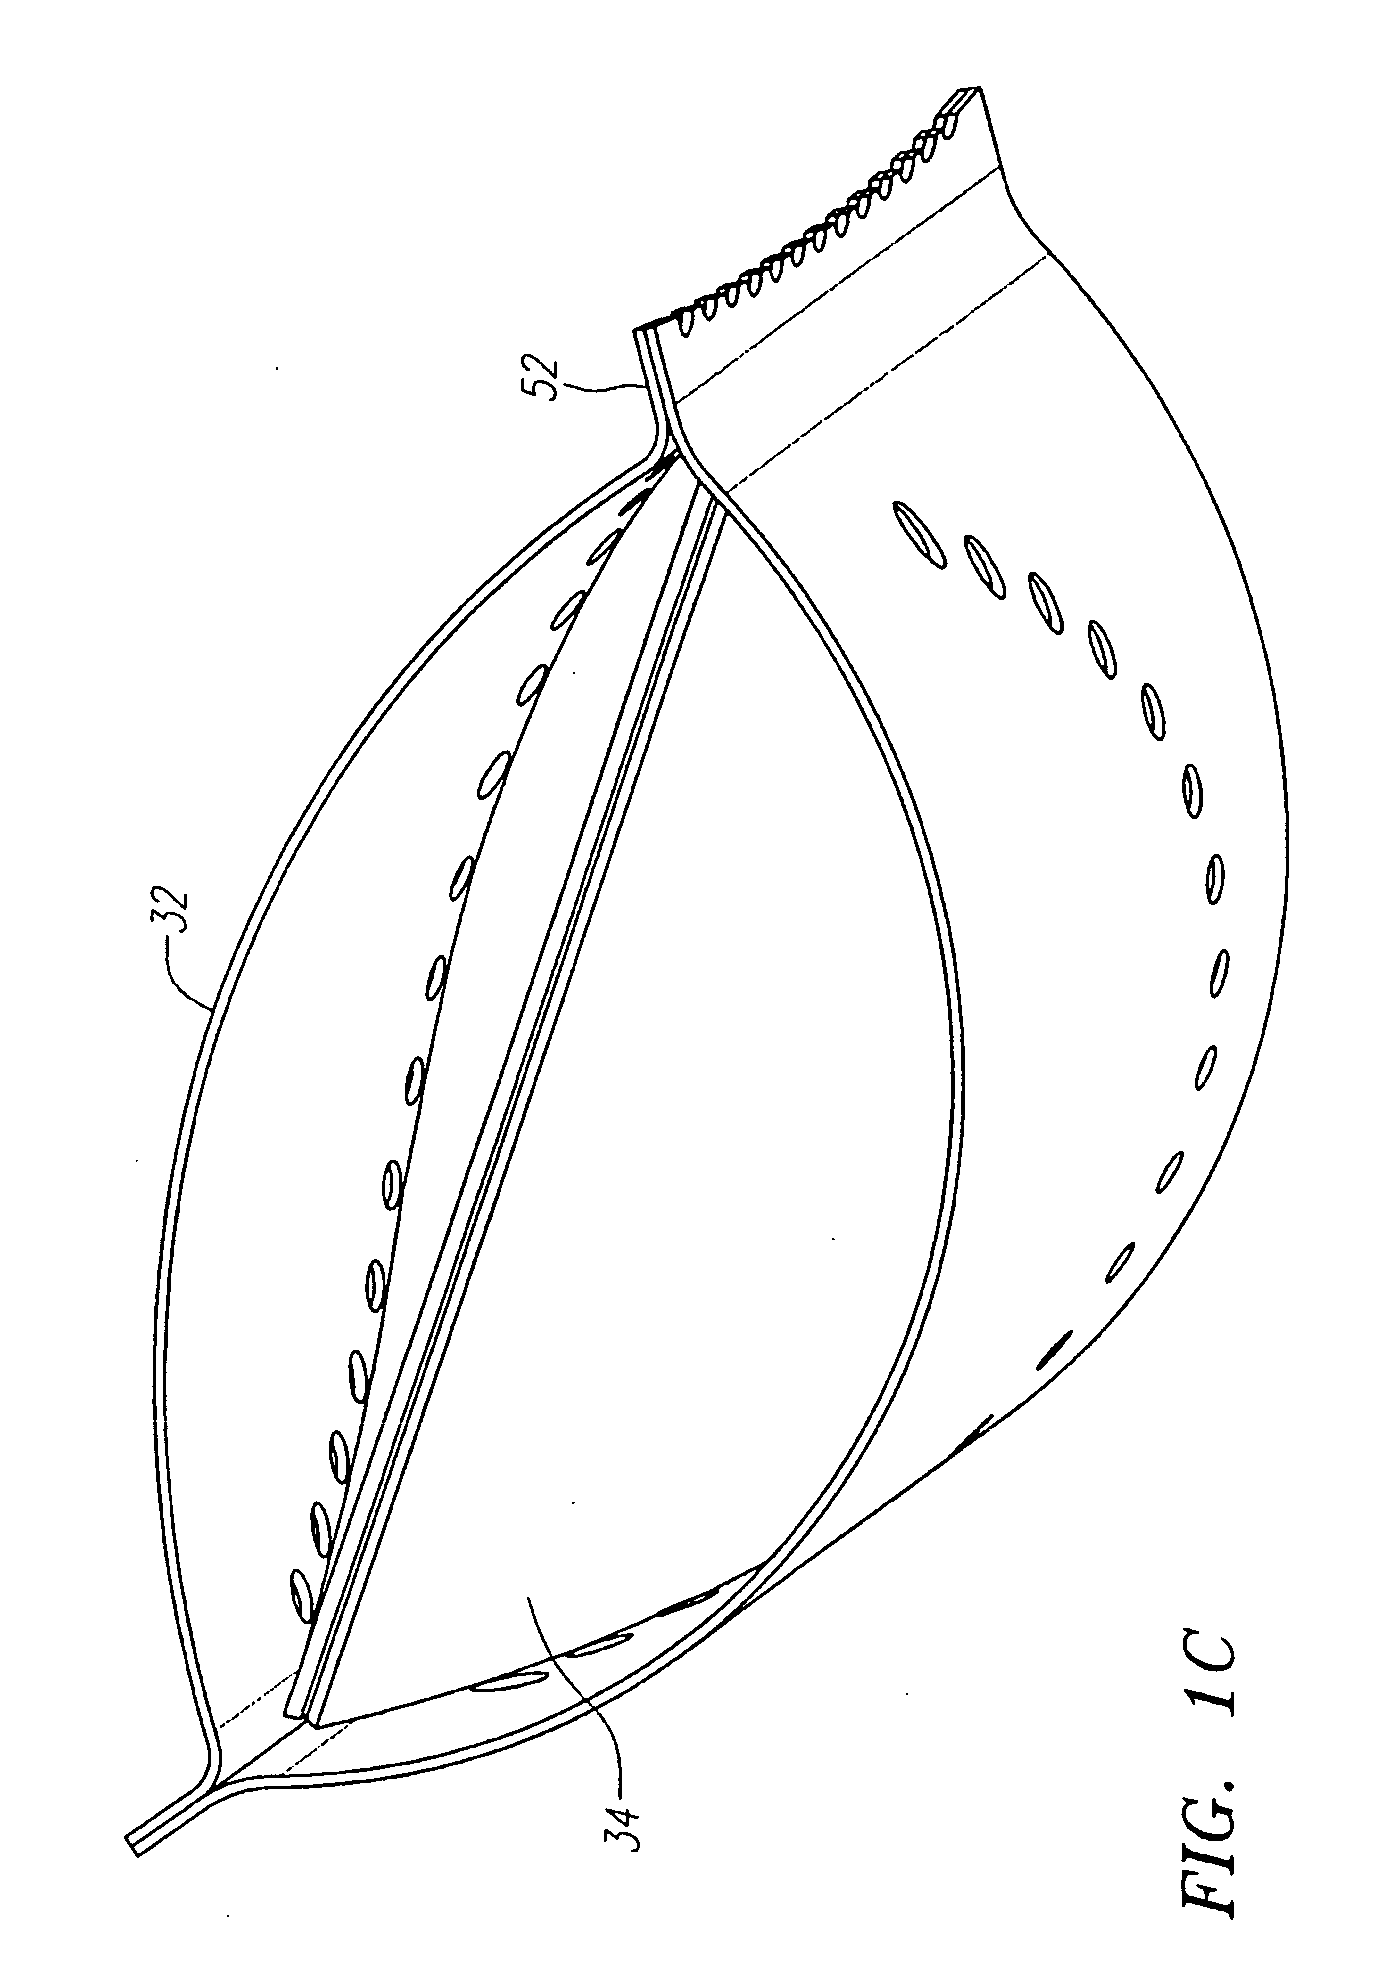 Prosthetic Heart Valves, Support Structures and Systems and Methods for Implanting the Same